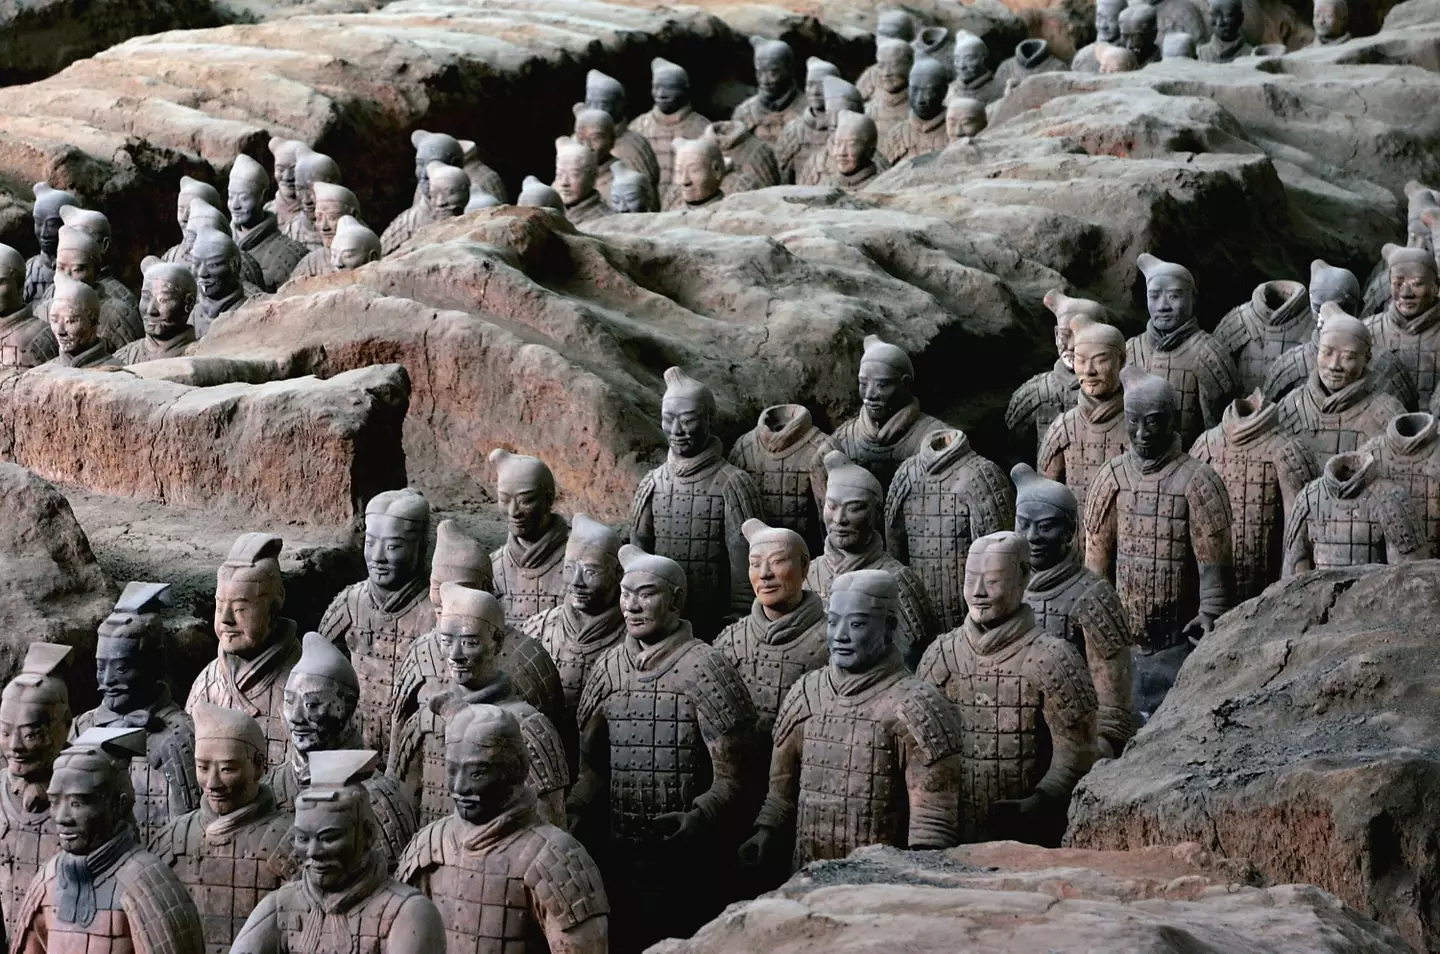 Figures that form part of the Terracotta Army.